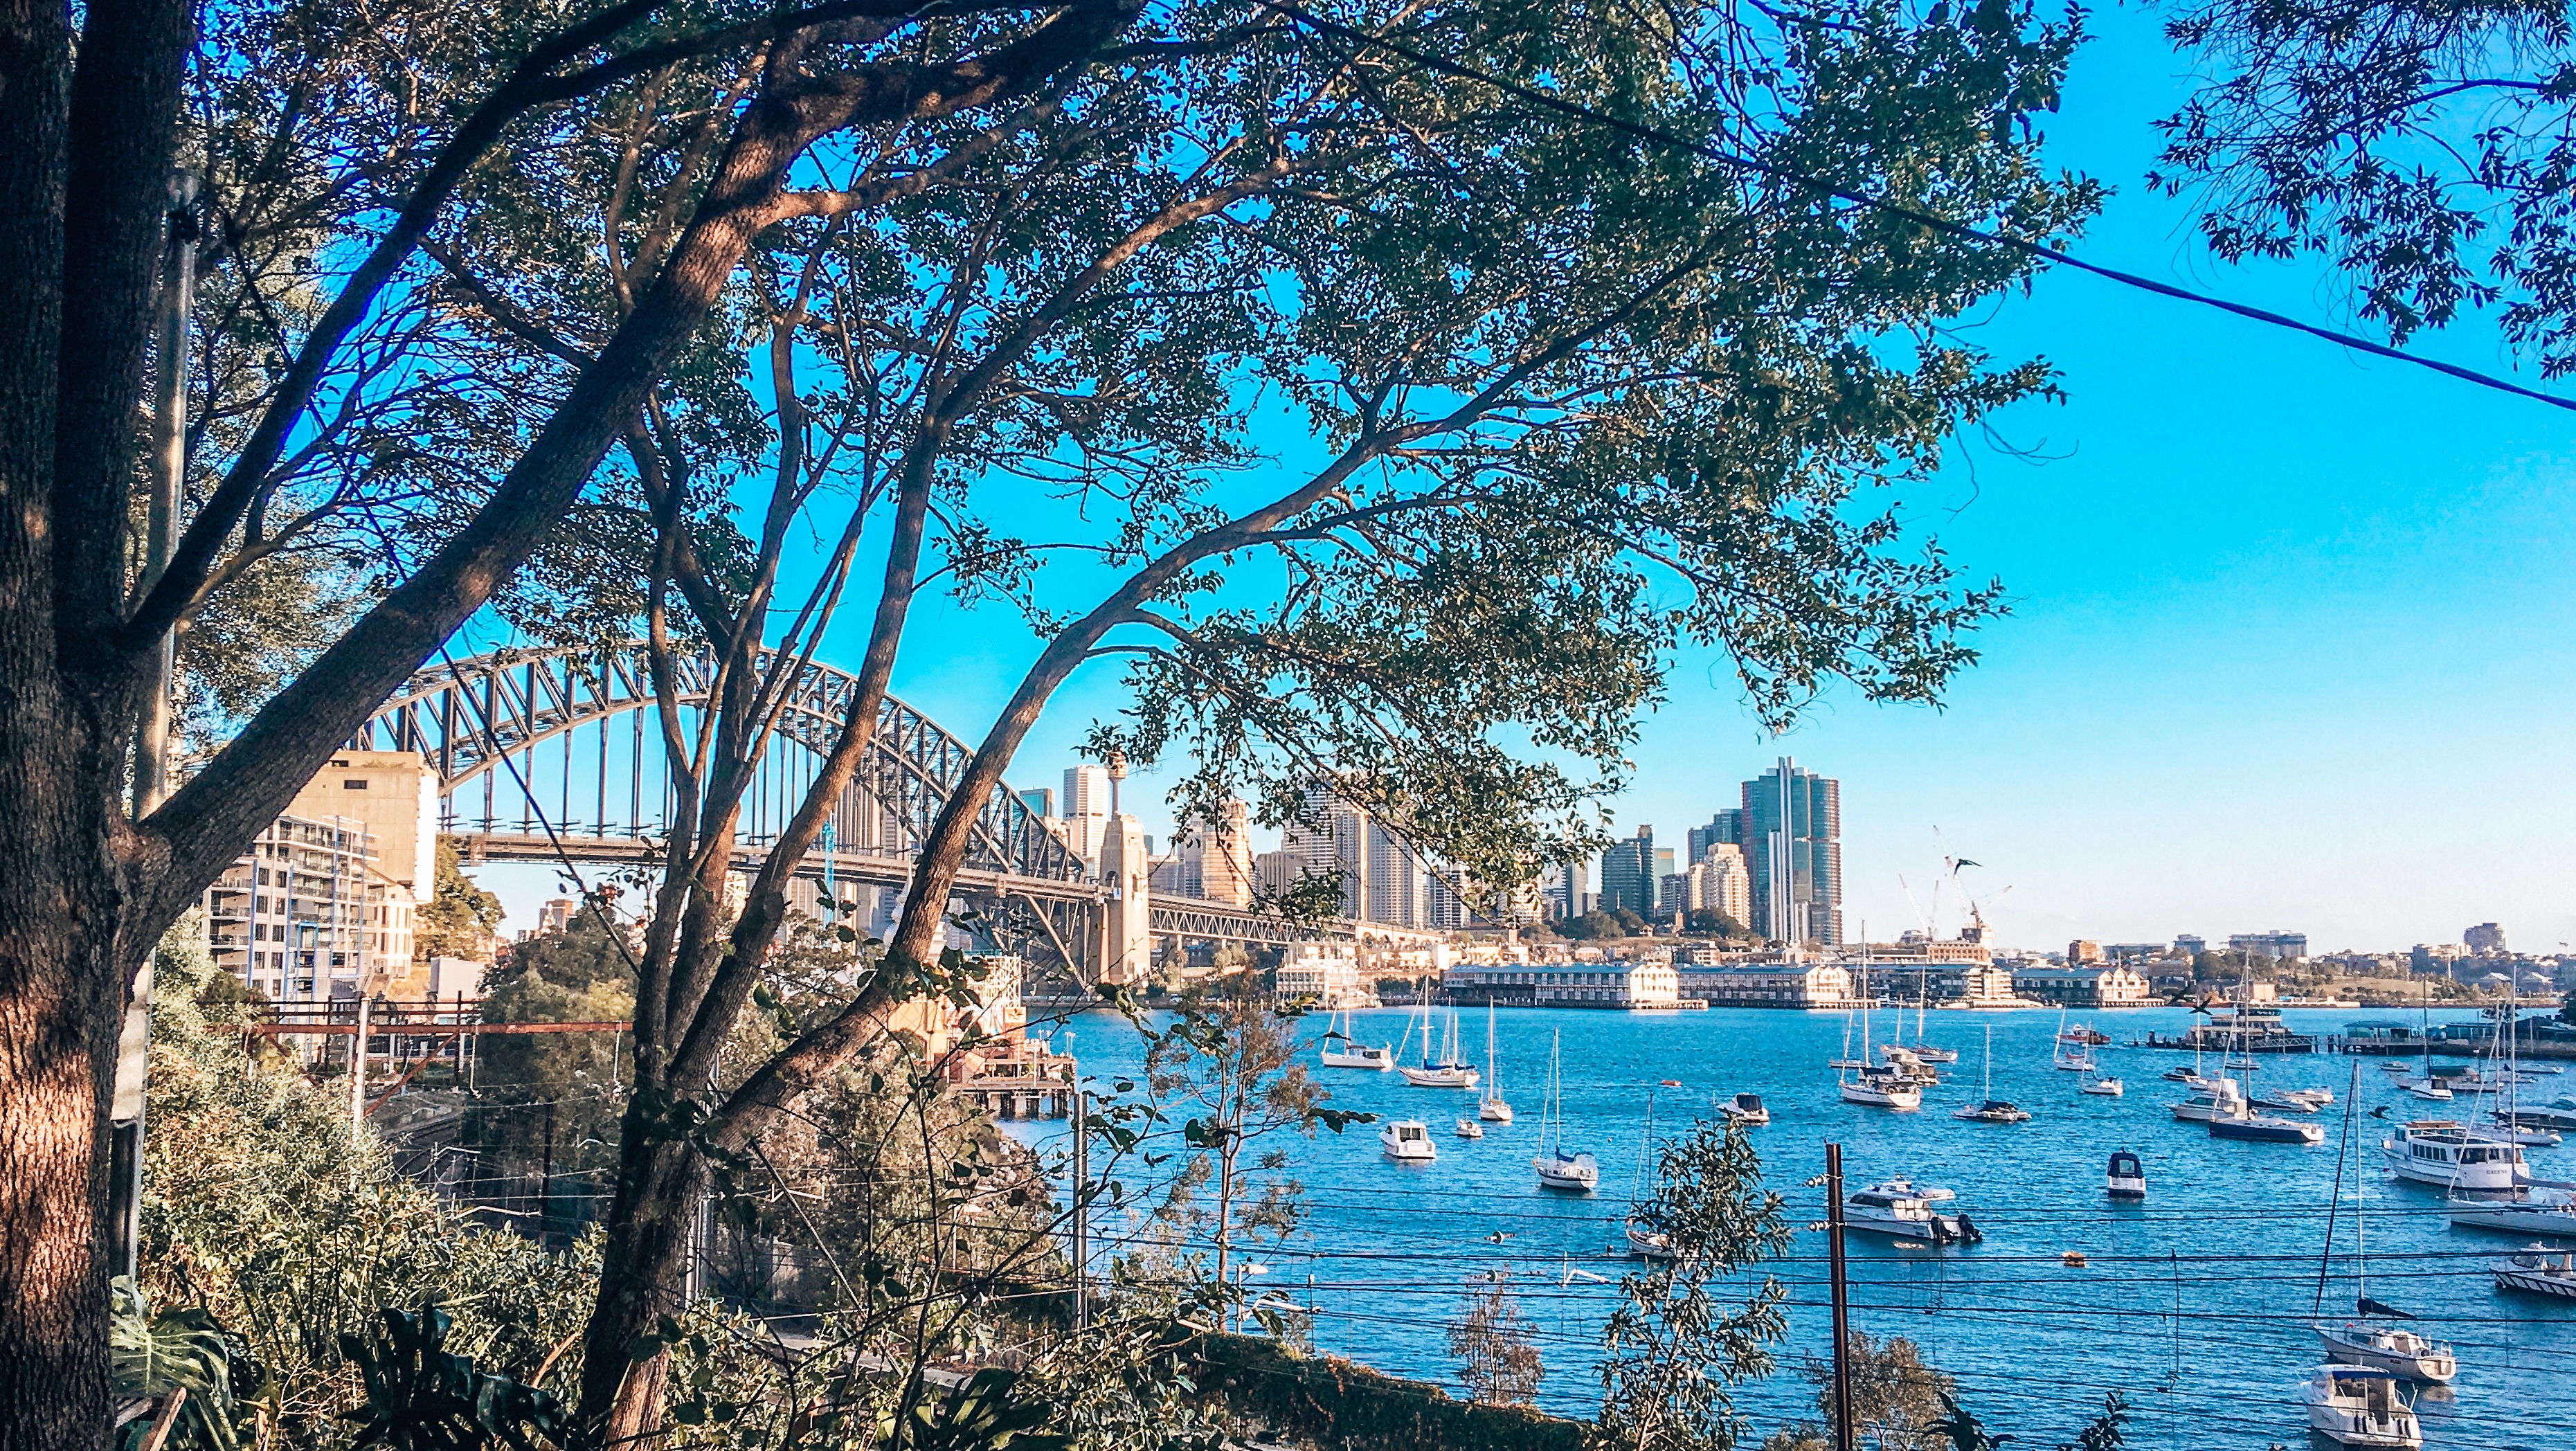 Image of Sydney Harbour bridge from a garden surrounded by trees with boats docked in the river below